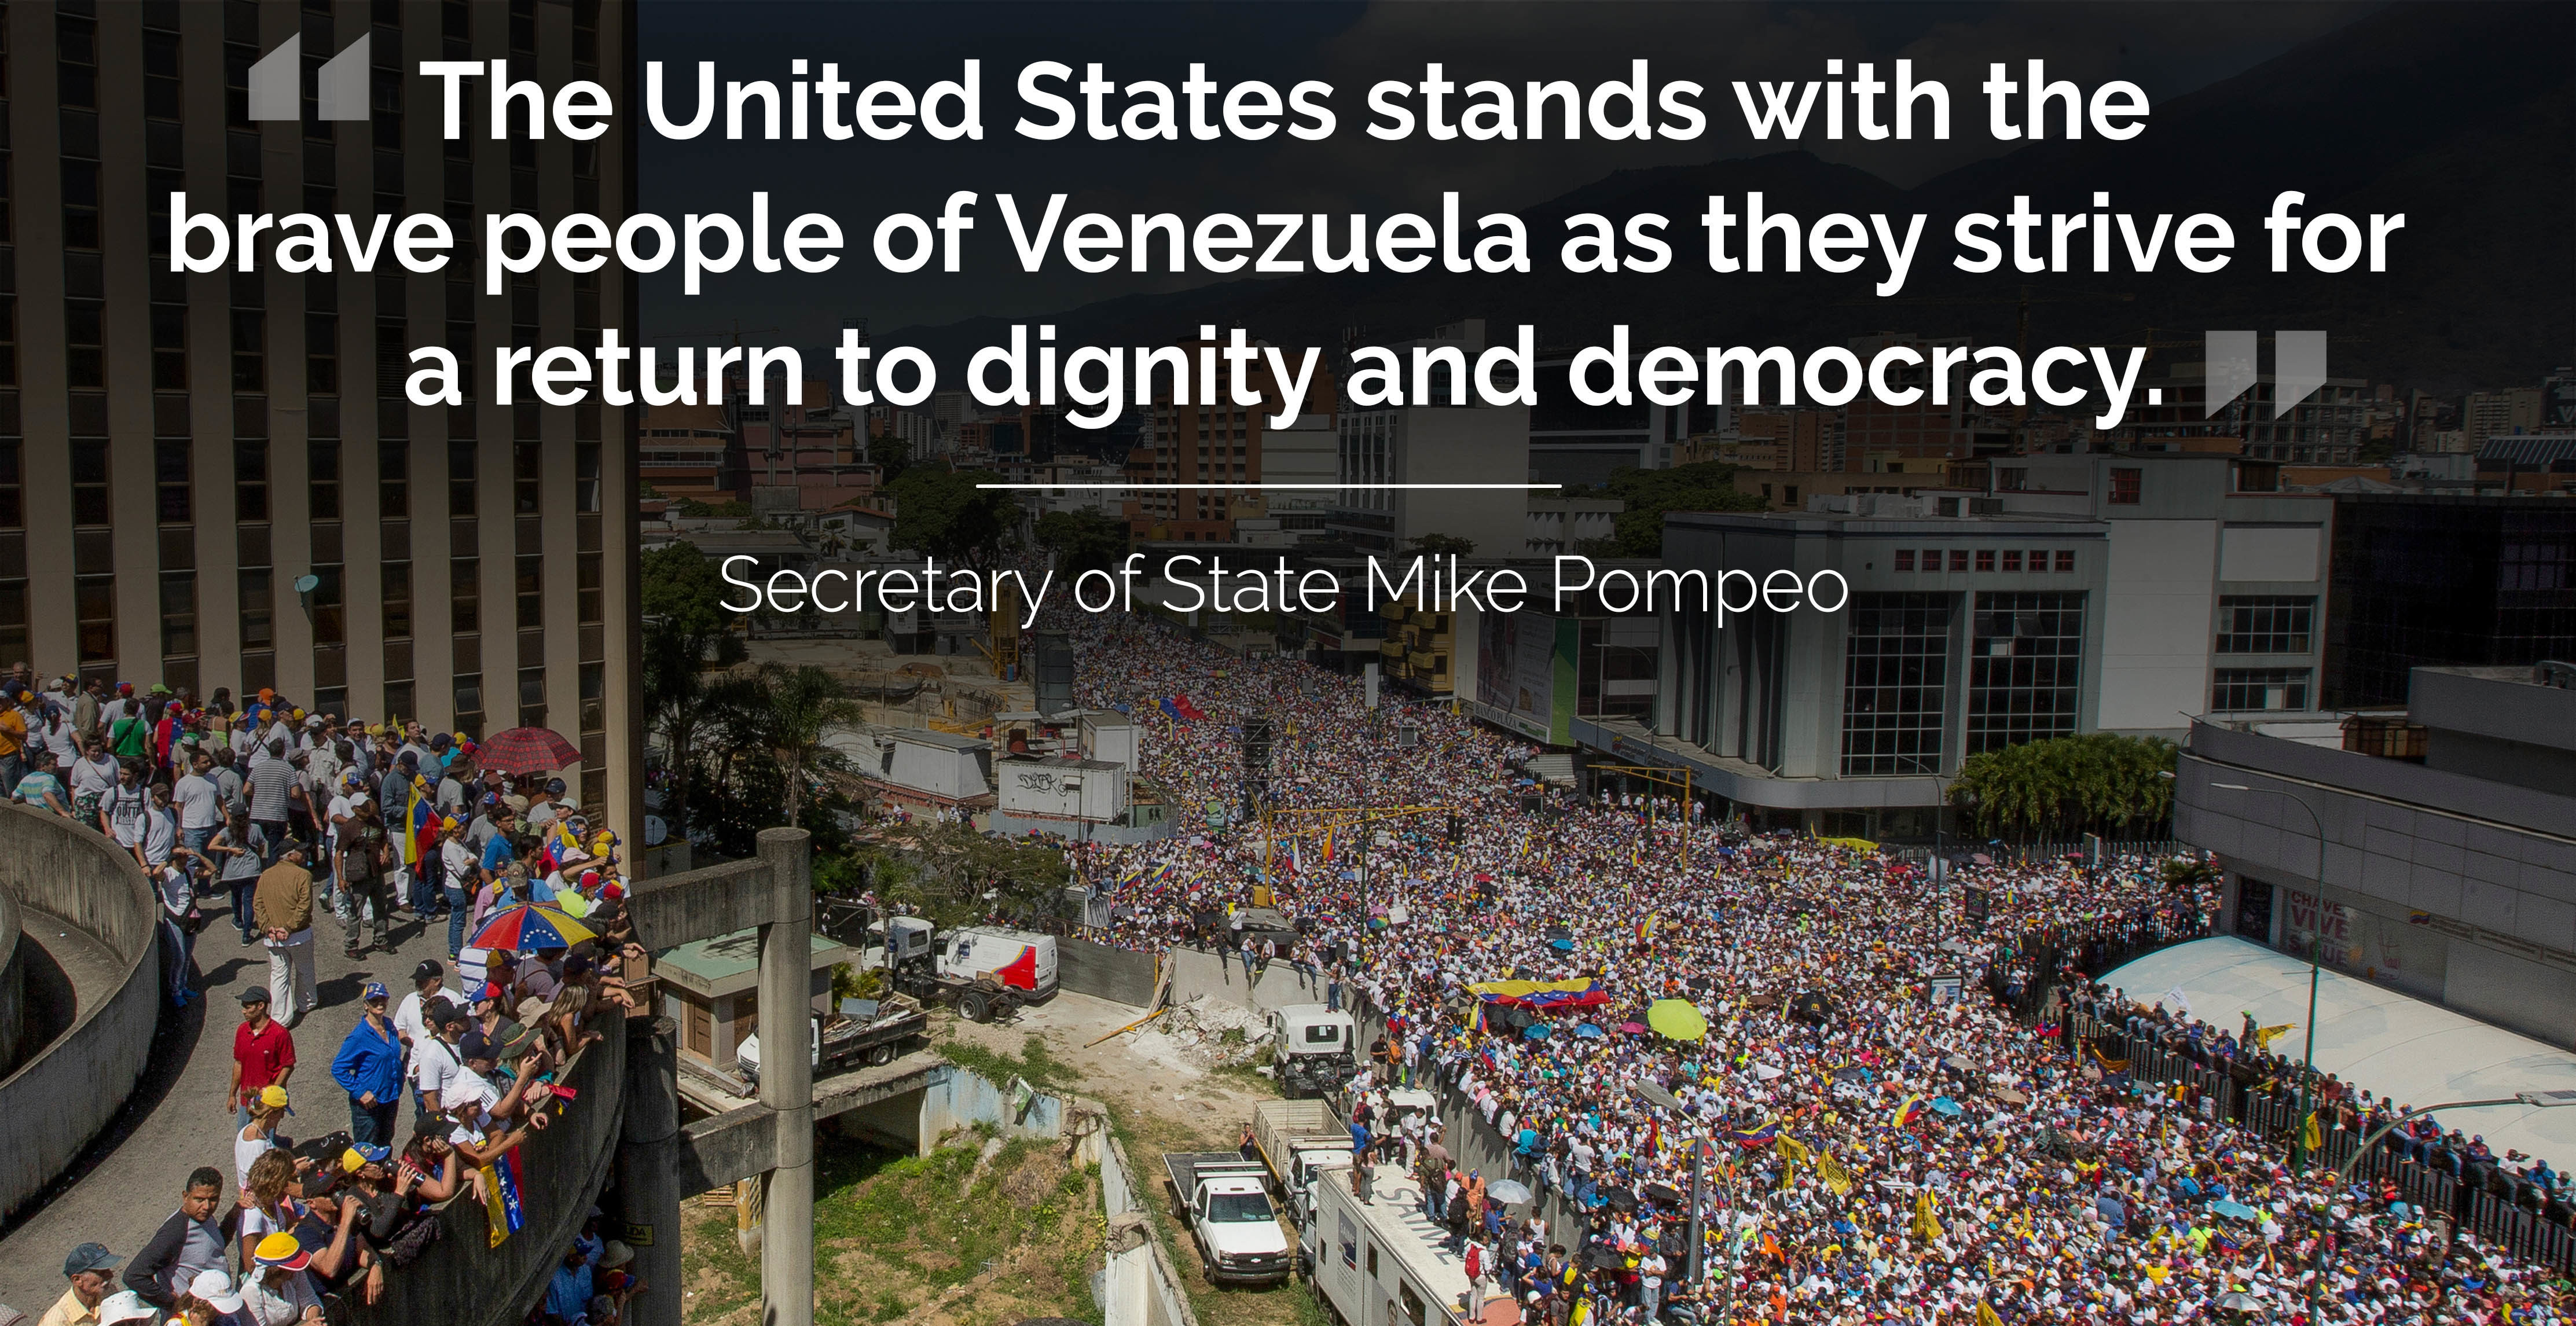 Photo of protest in Venezuela with text: "'The United States stands with the brave people of Venezuela as they strive for a return to dignity and democracy.' - Secretary of State Mike Pompeo"